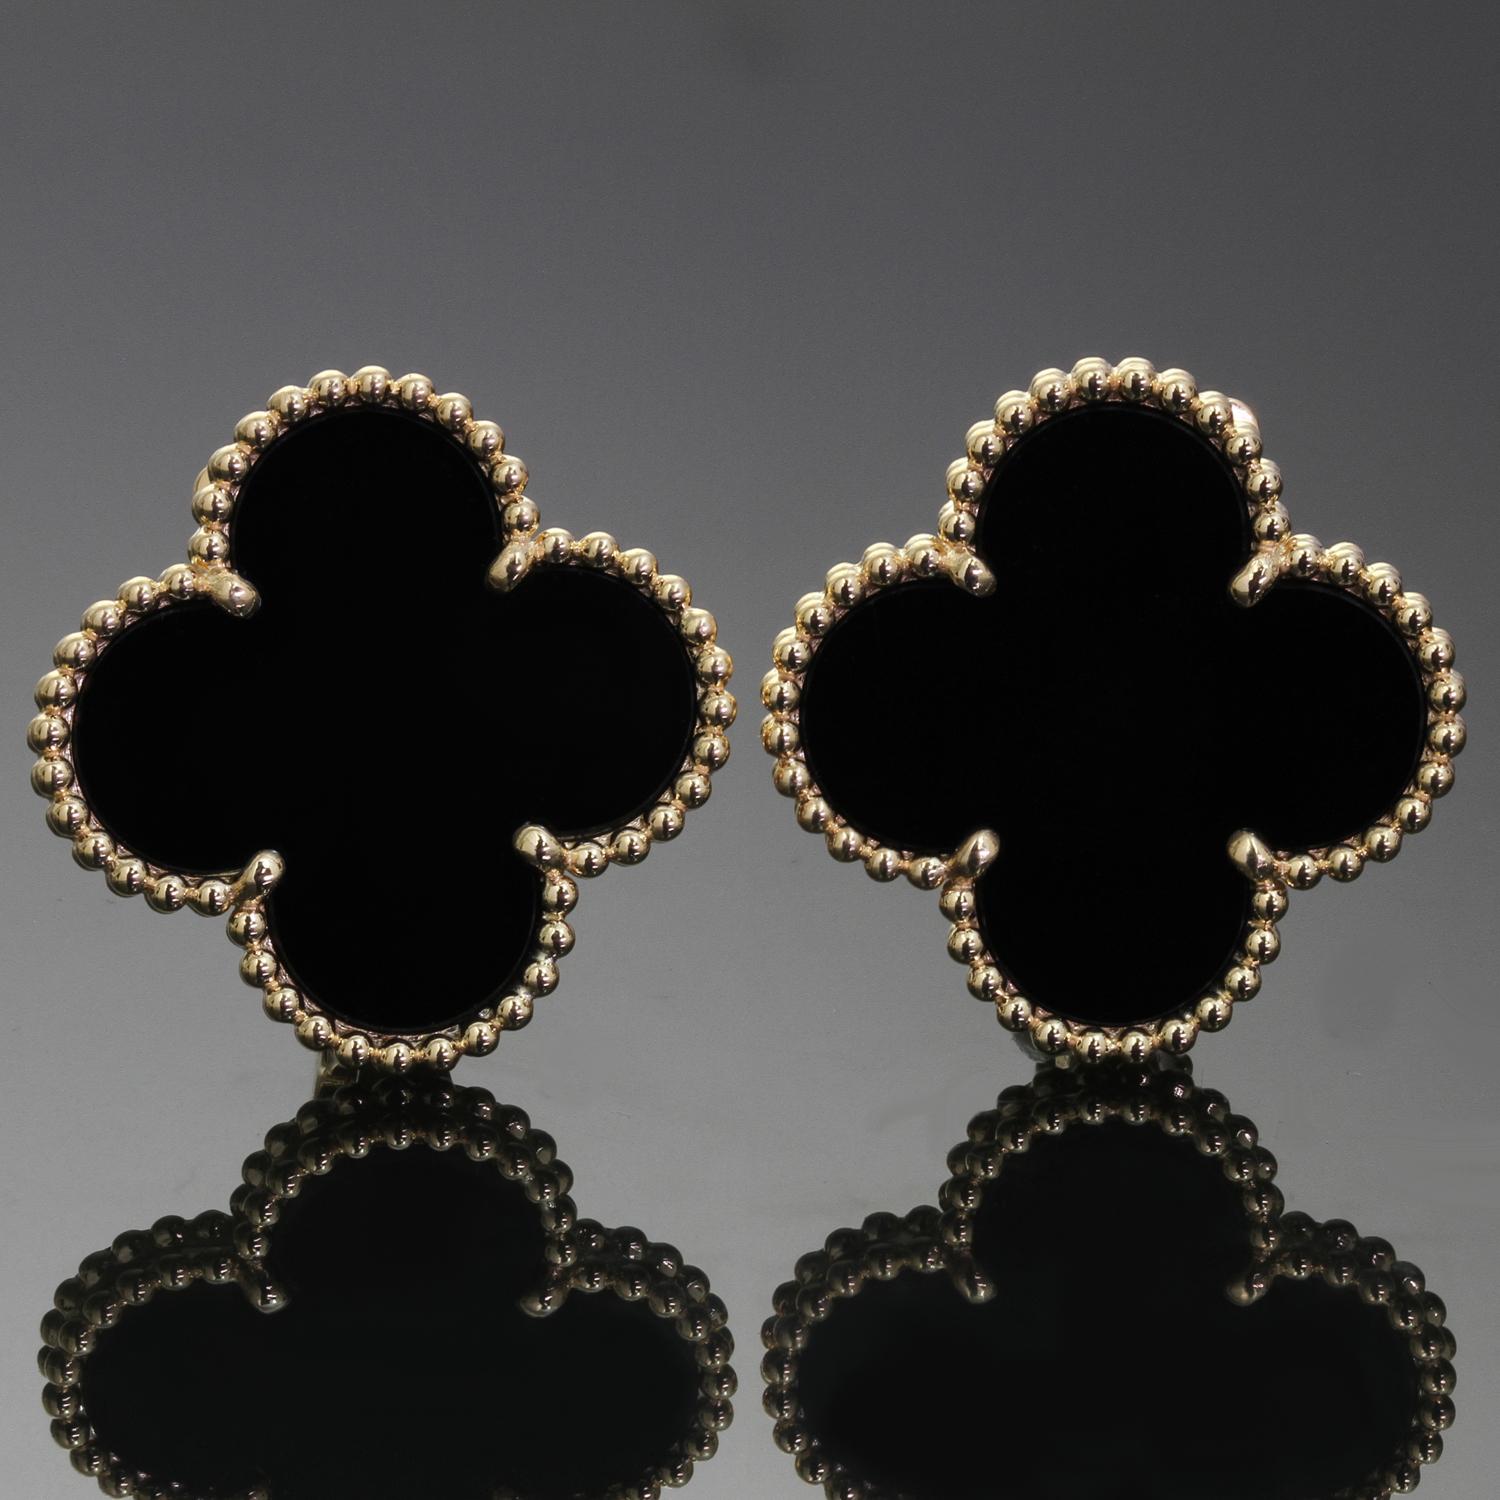 These elegant Van Cleef & Arpels drop earrings from the Magic Alhambra collection are crafted in 18k yellow gold and feature a pair of lucky clover motifs inlaid with black onyx in round bead settings. Made in France circa 2012. Excellent condition.